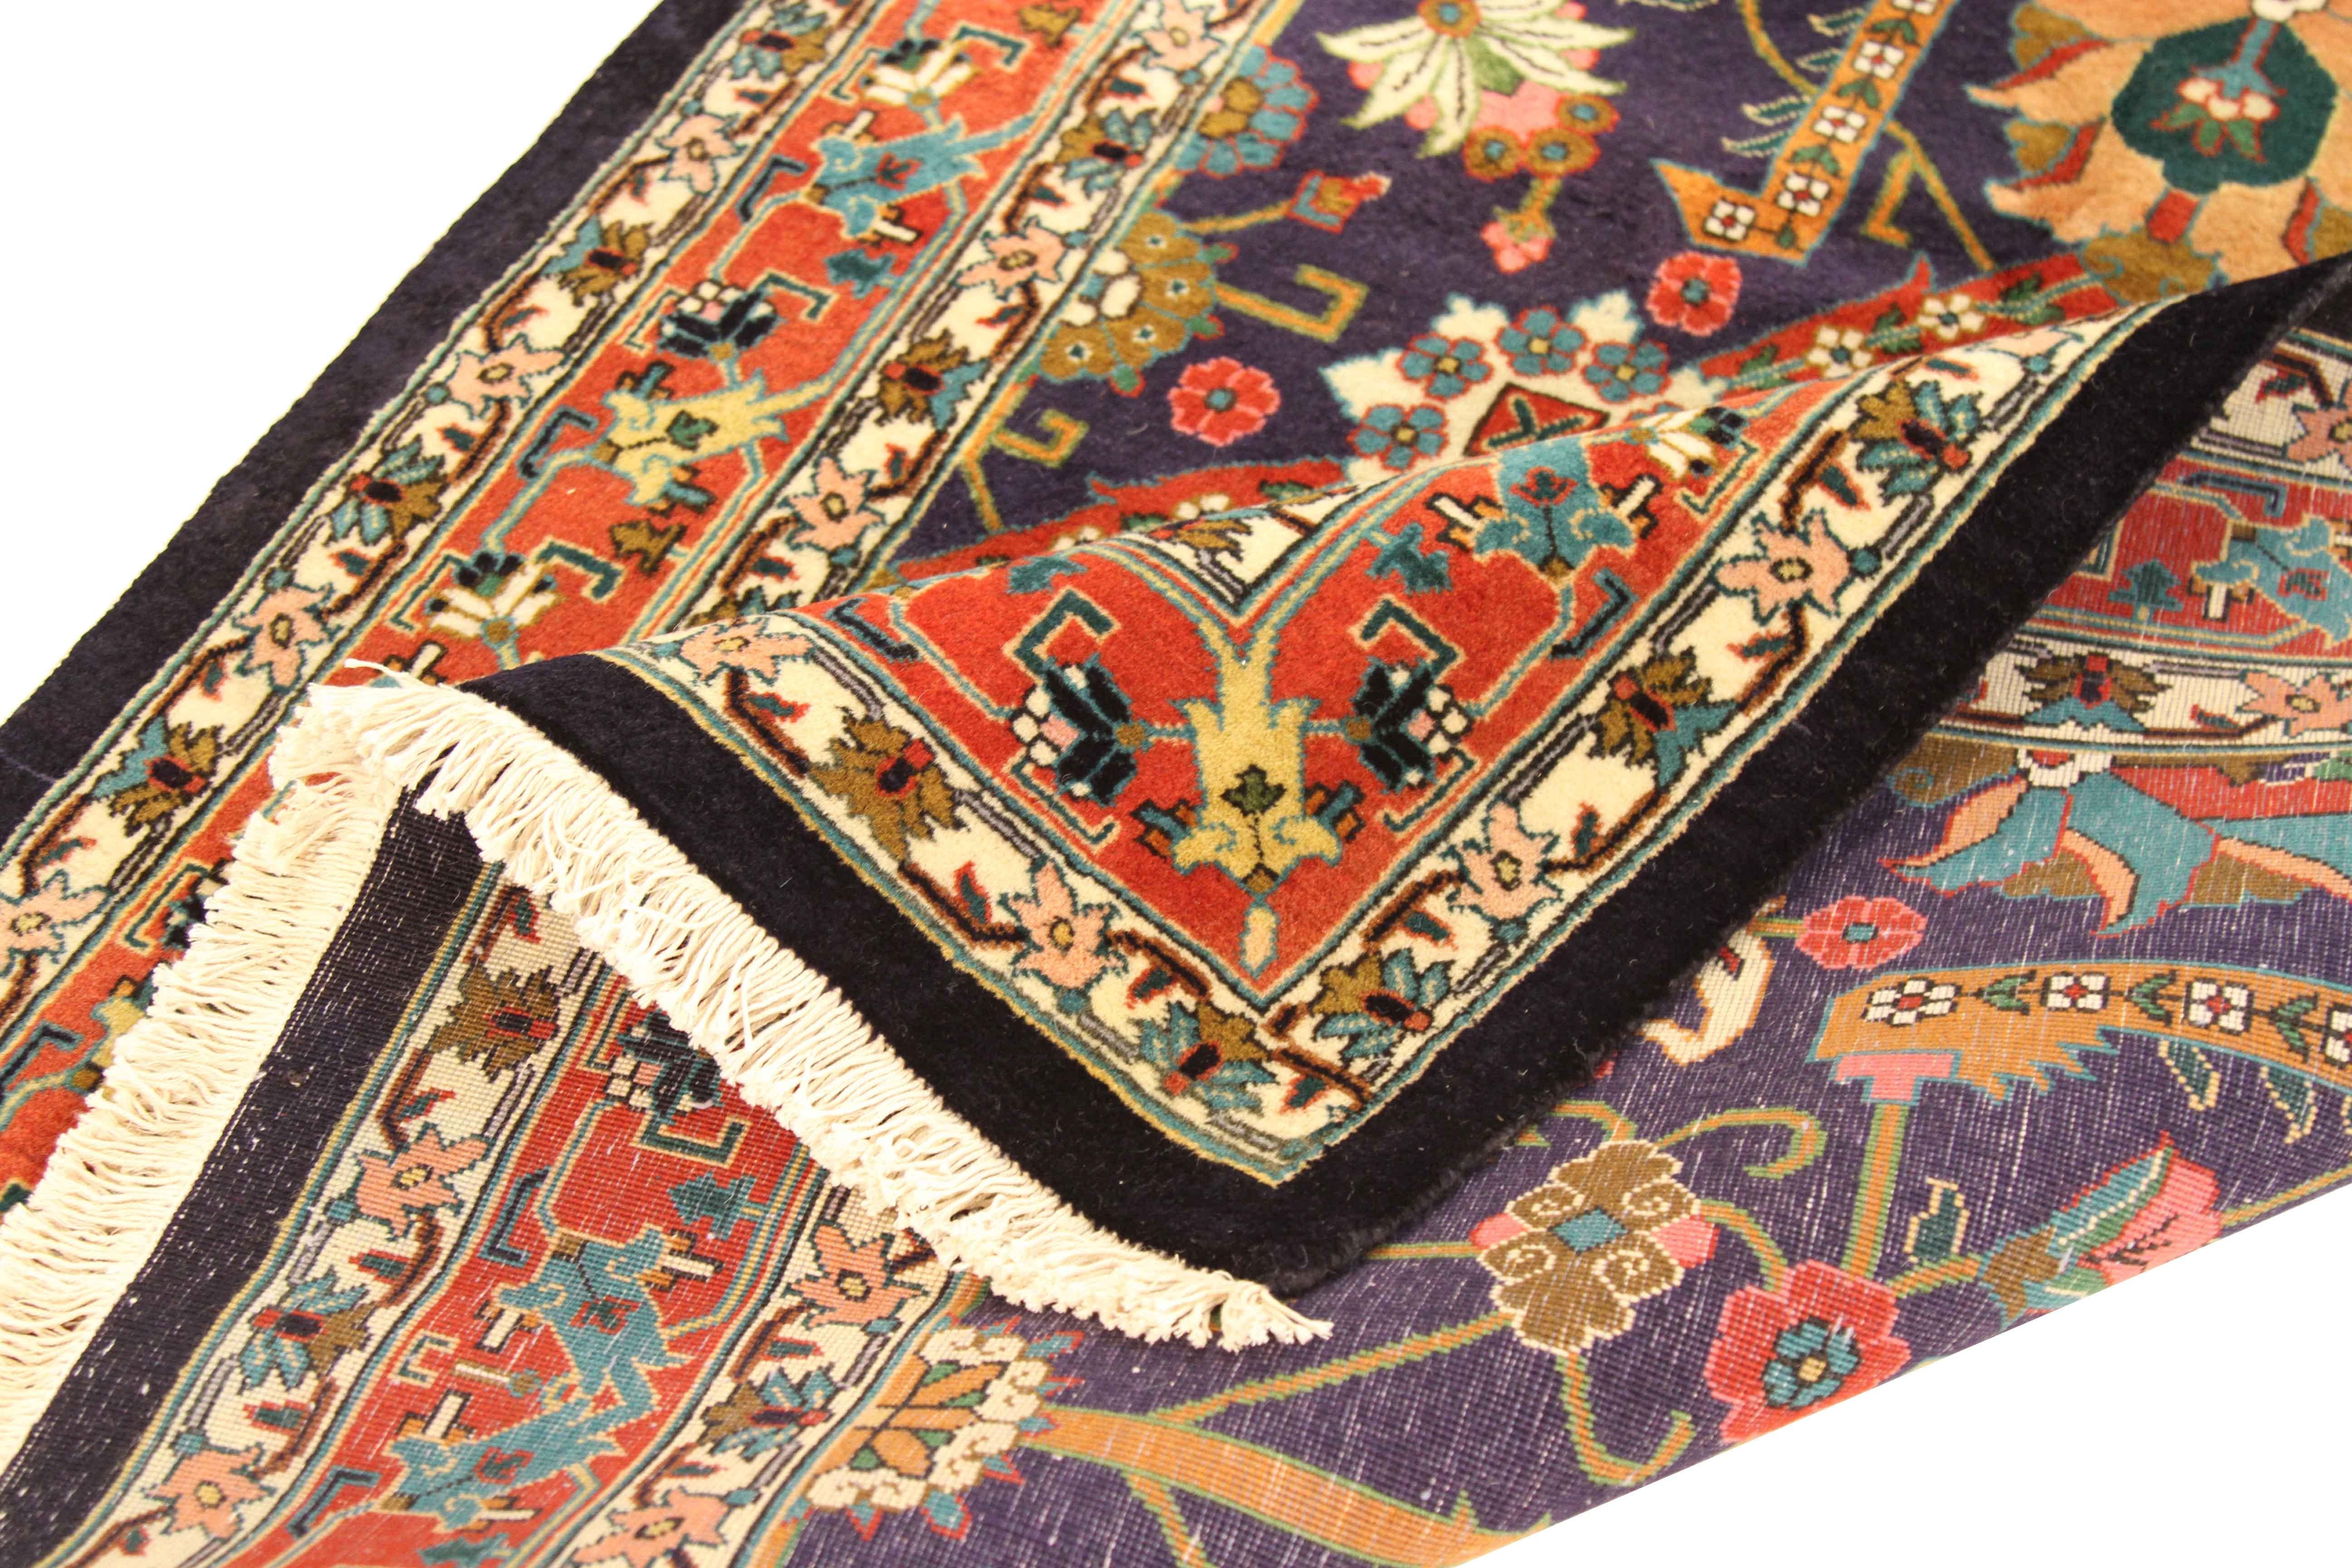 Hand knotted from exquisitely fine wool, this antique rug from Turkey displays the grand floral patterns collectors and designers love about the Tabriz style of weaving. Bursting with colors of blue, green, navy and red, it’s a great match for